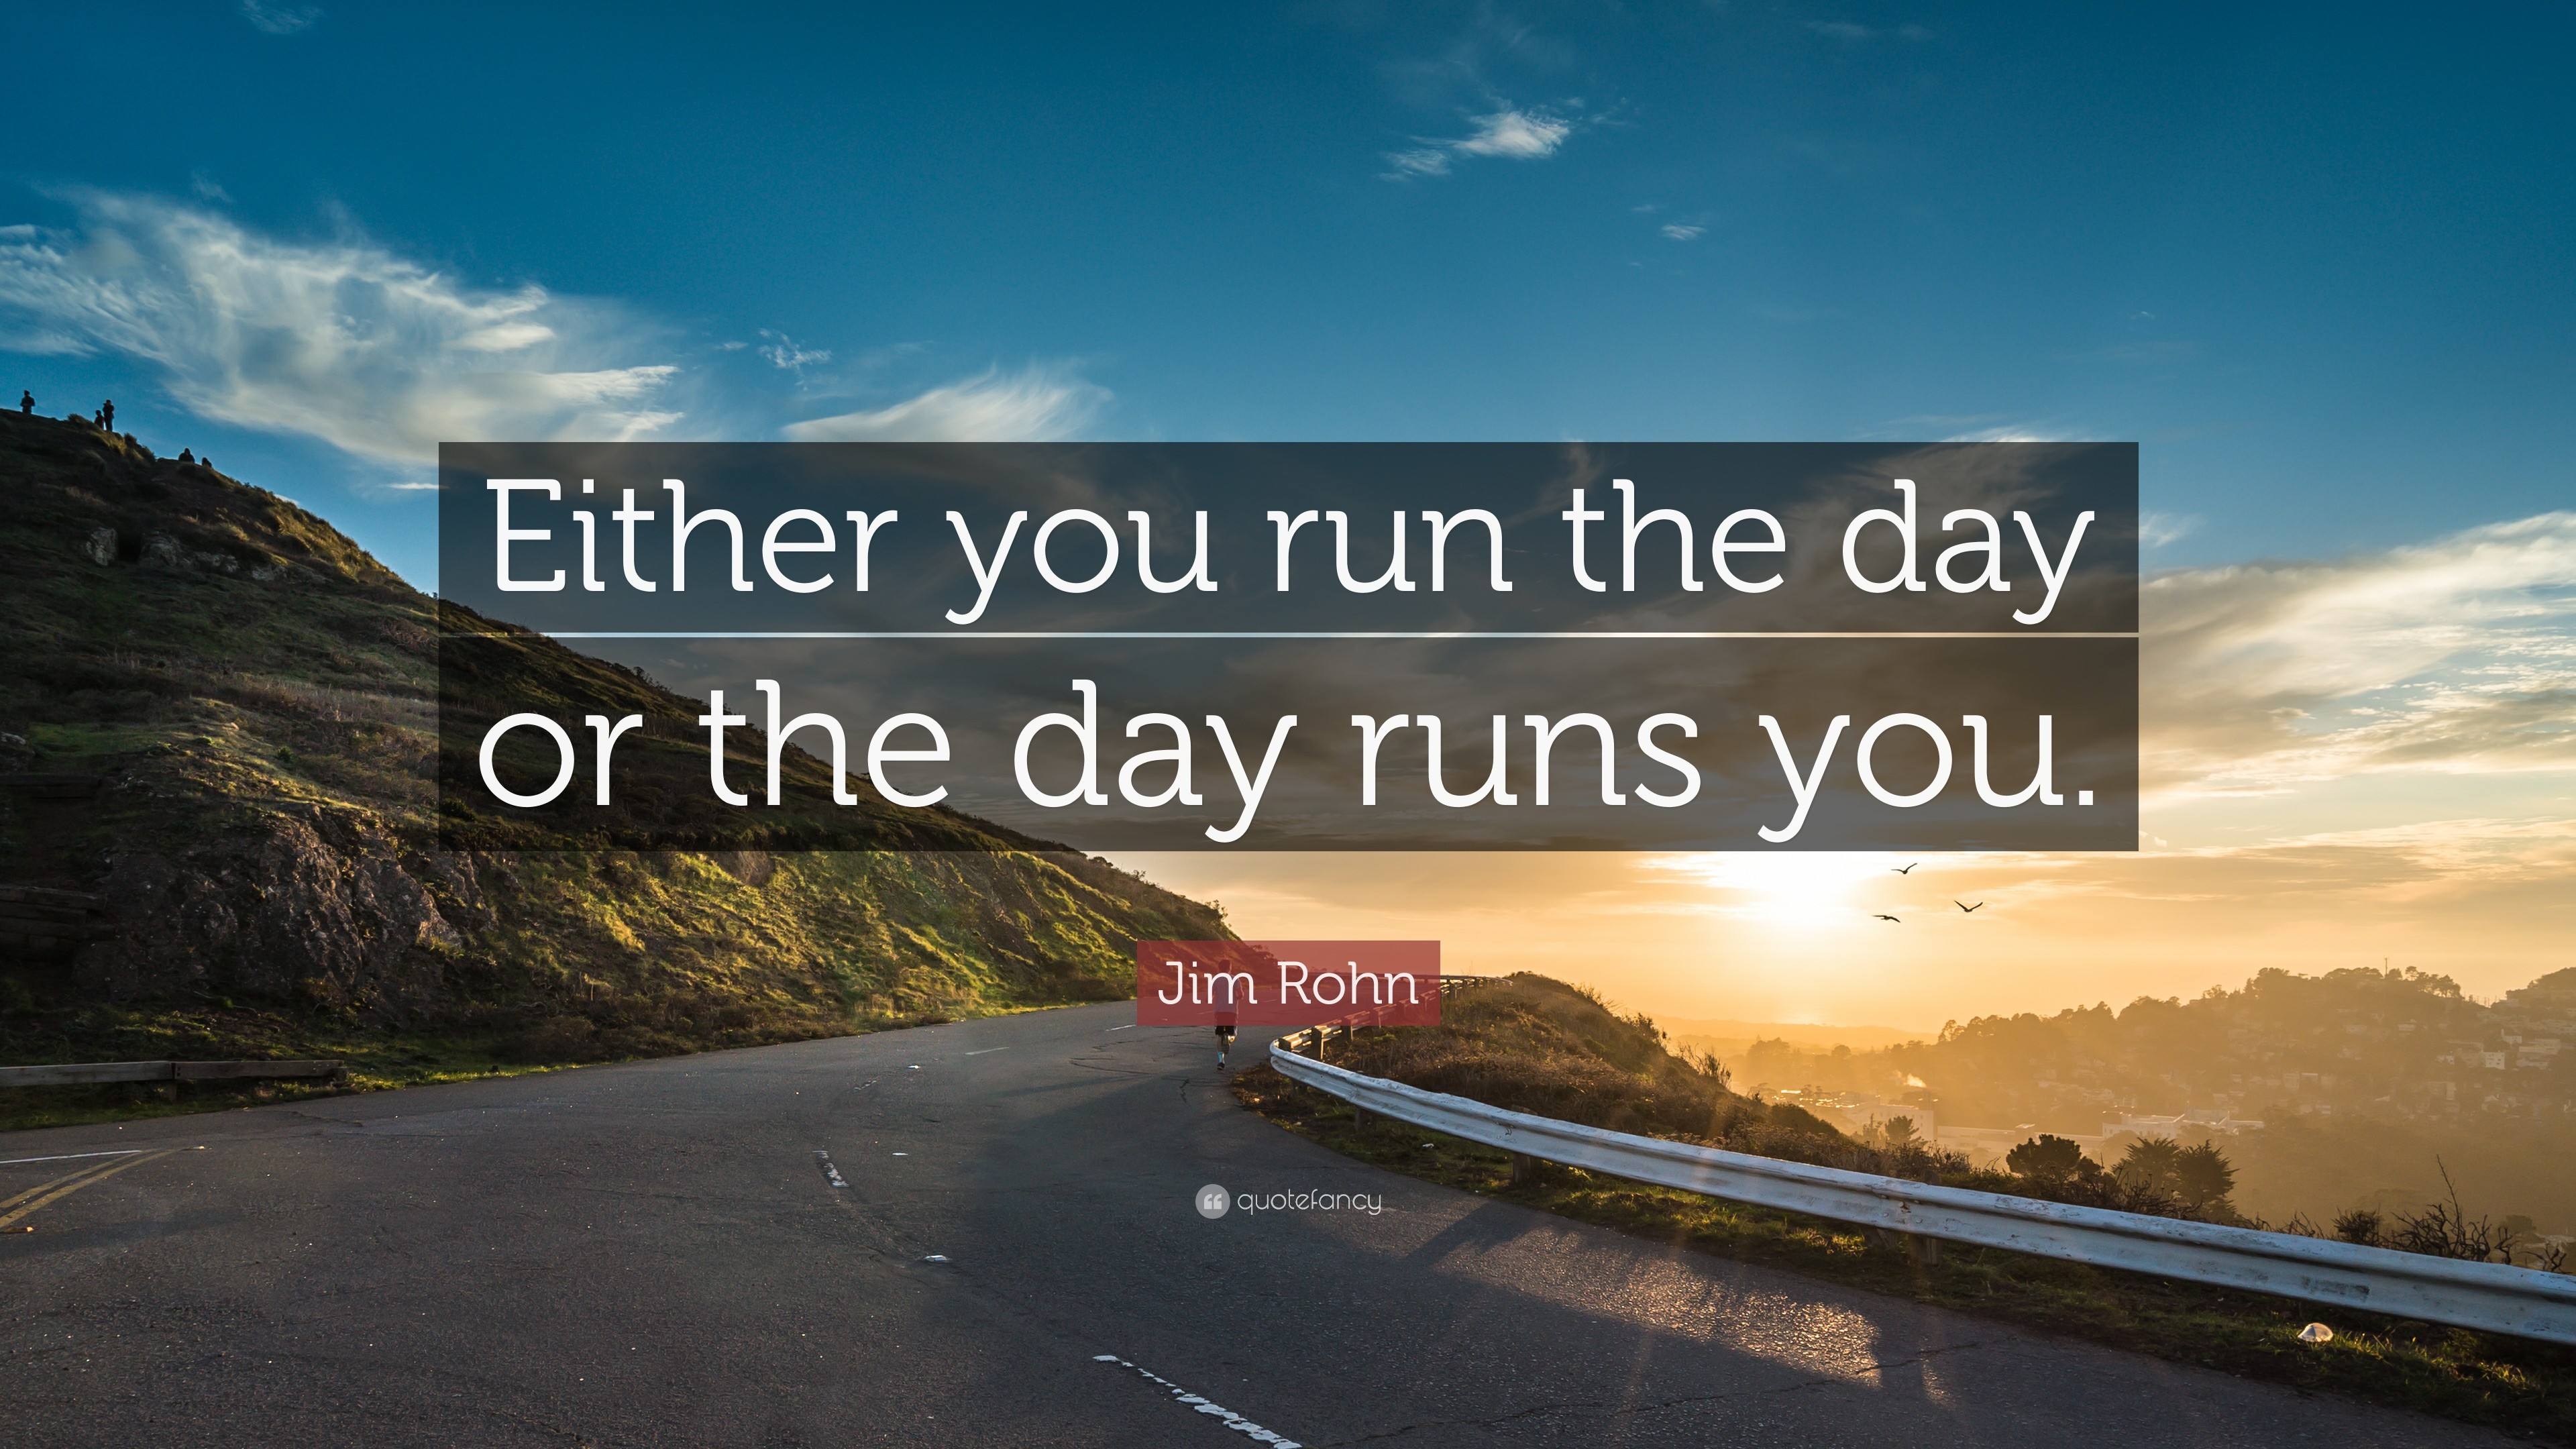 3840x2160 Positive Quotes: “Either you run the day or the day runs you.”